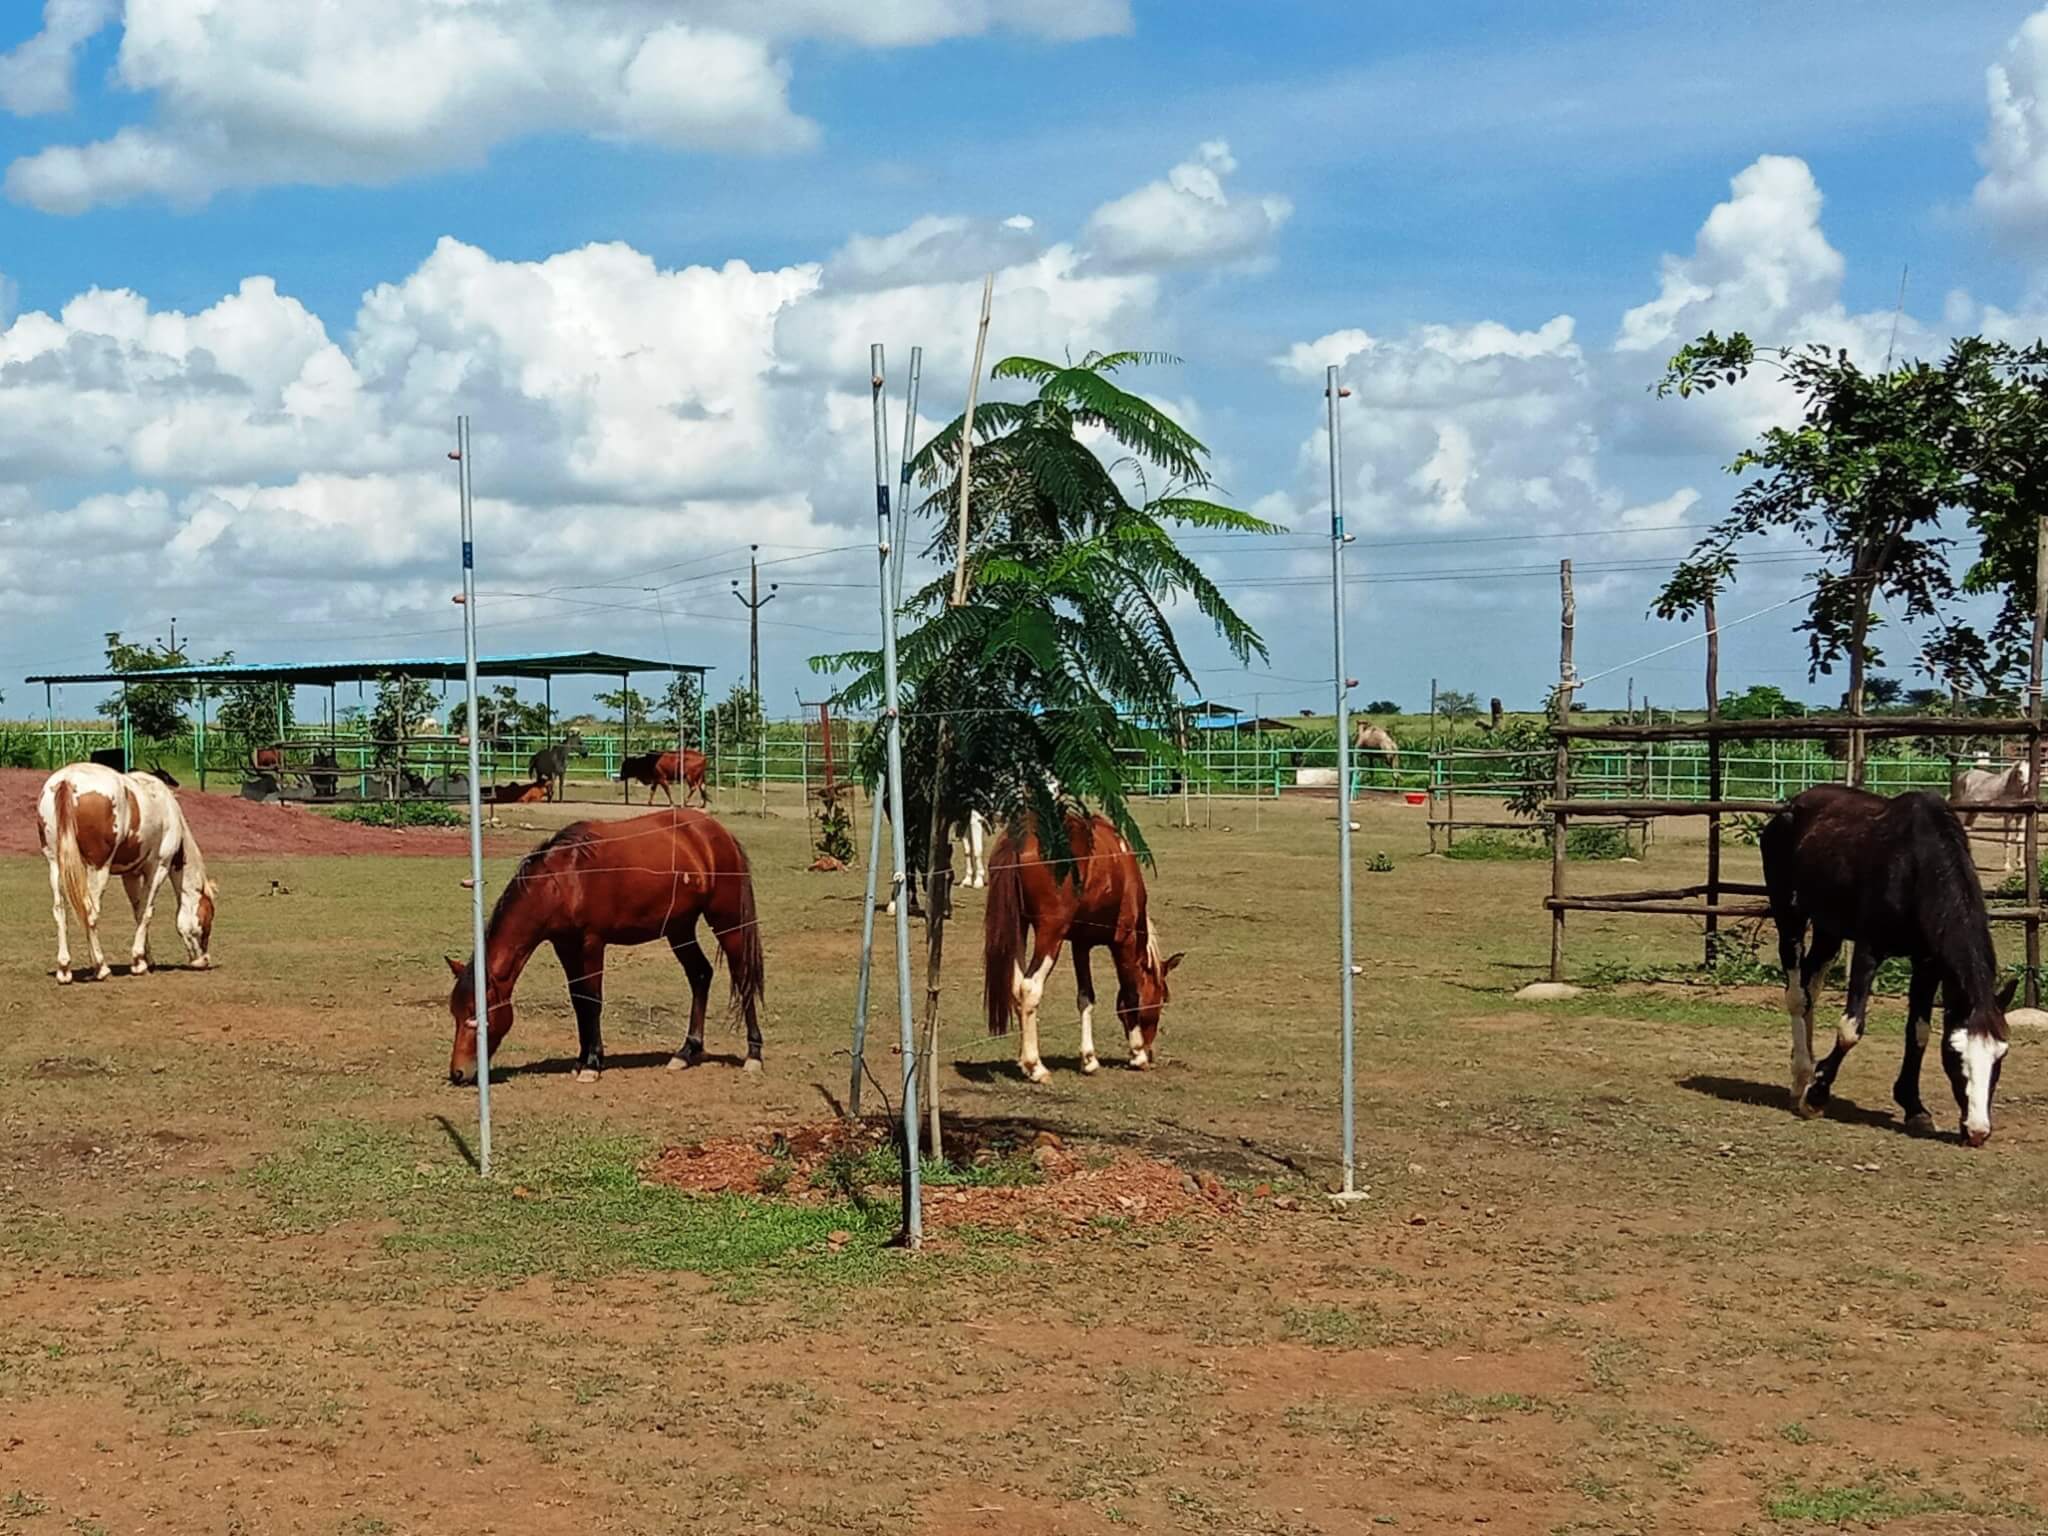 Rescued horses and ponies graze on green grass that grows between the sanctuary's trees.